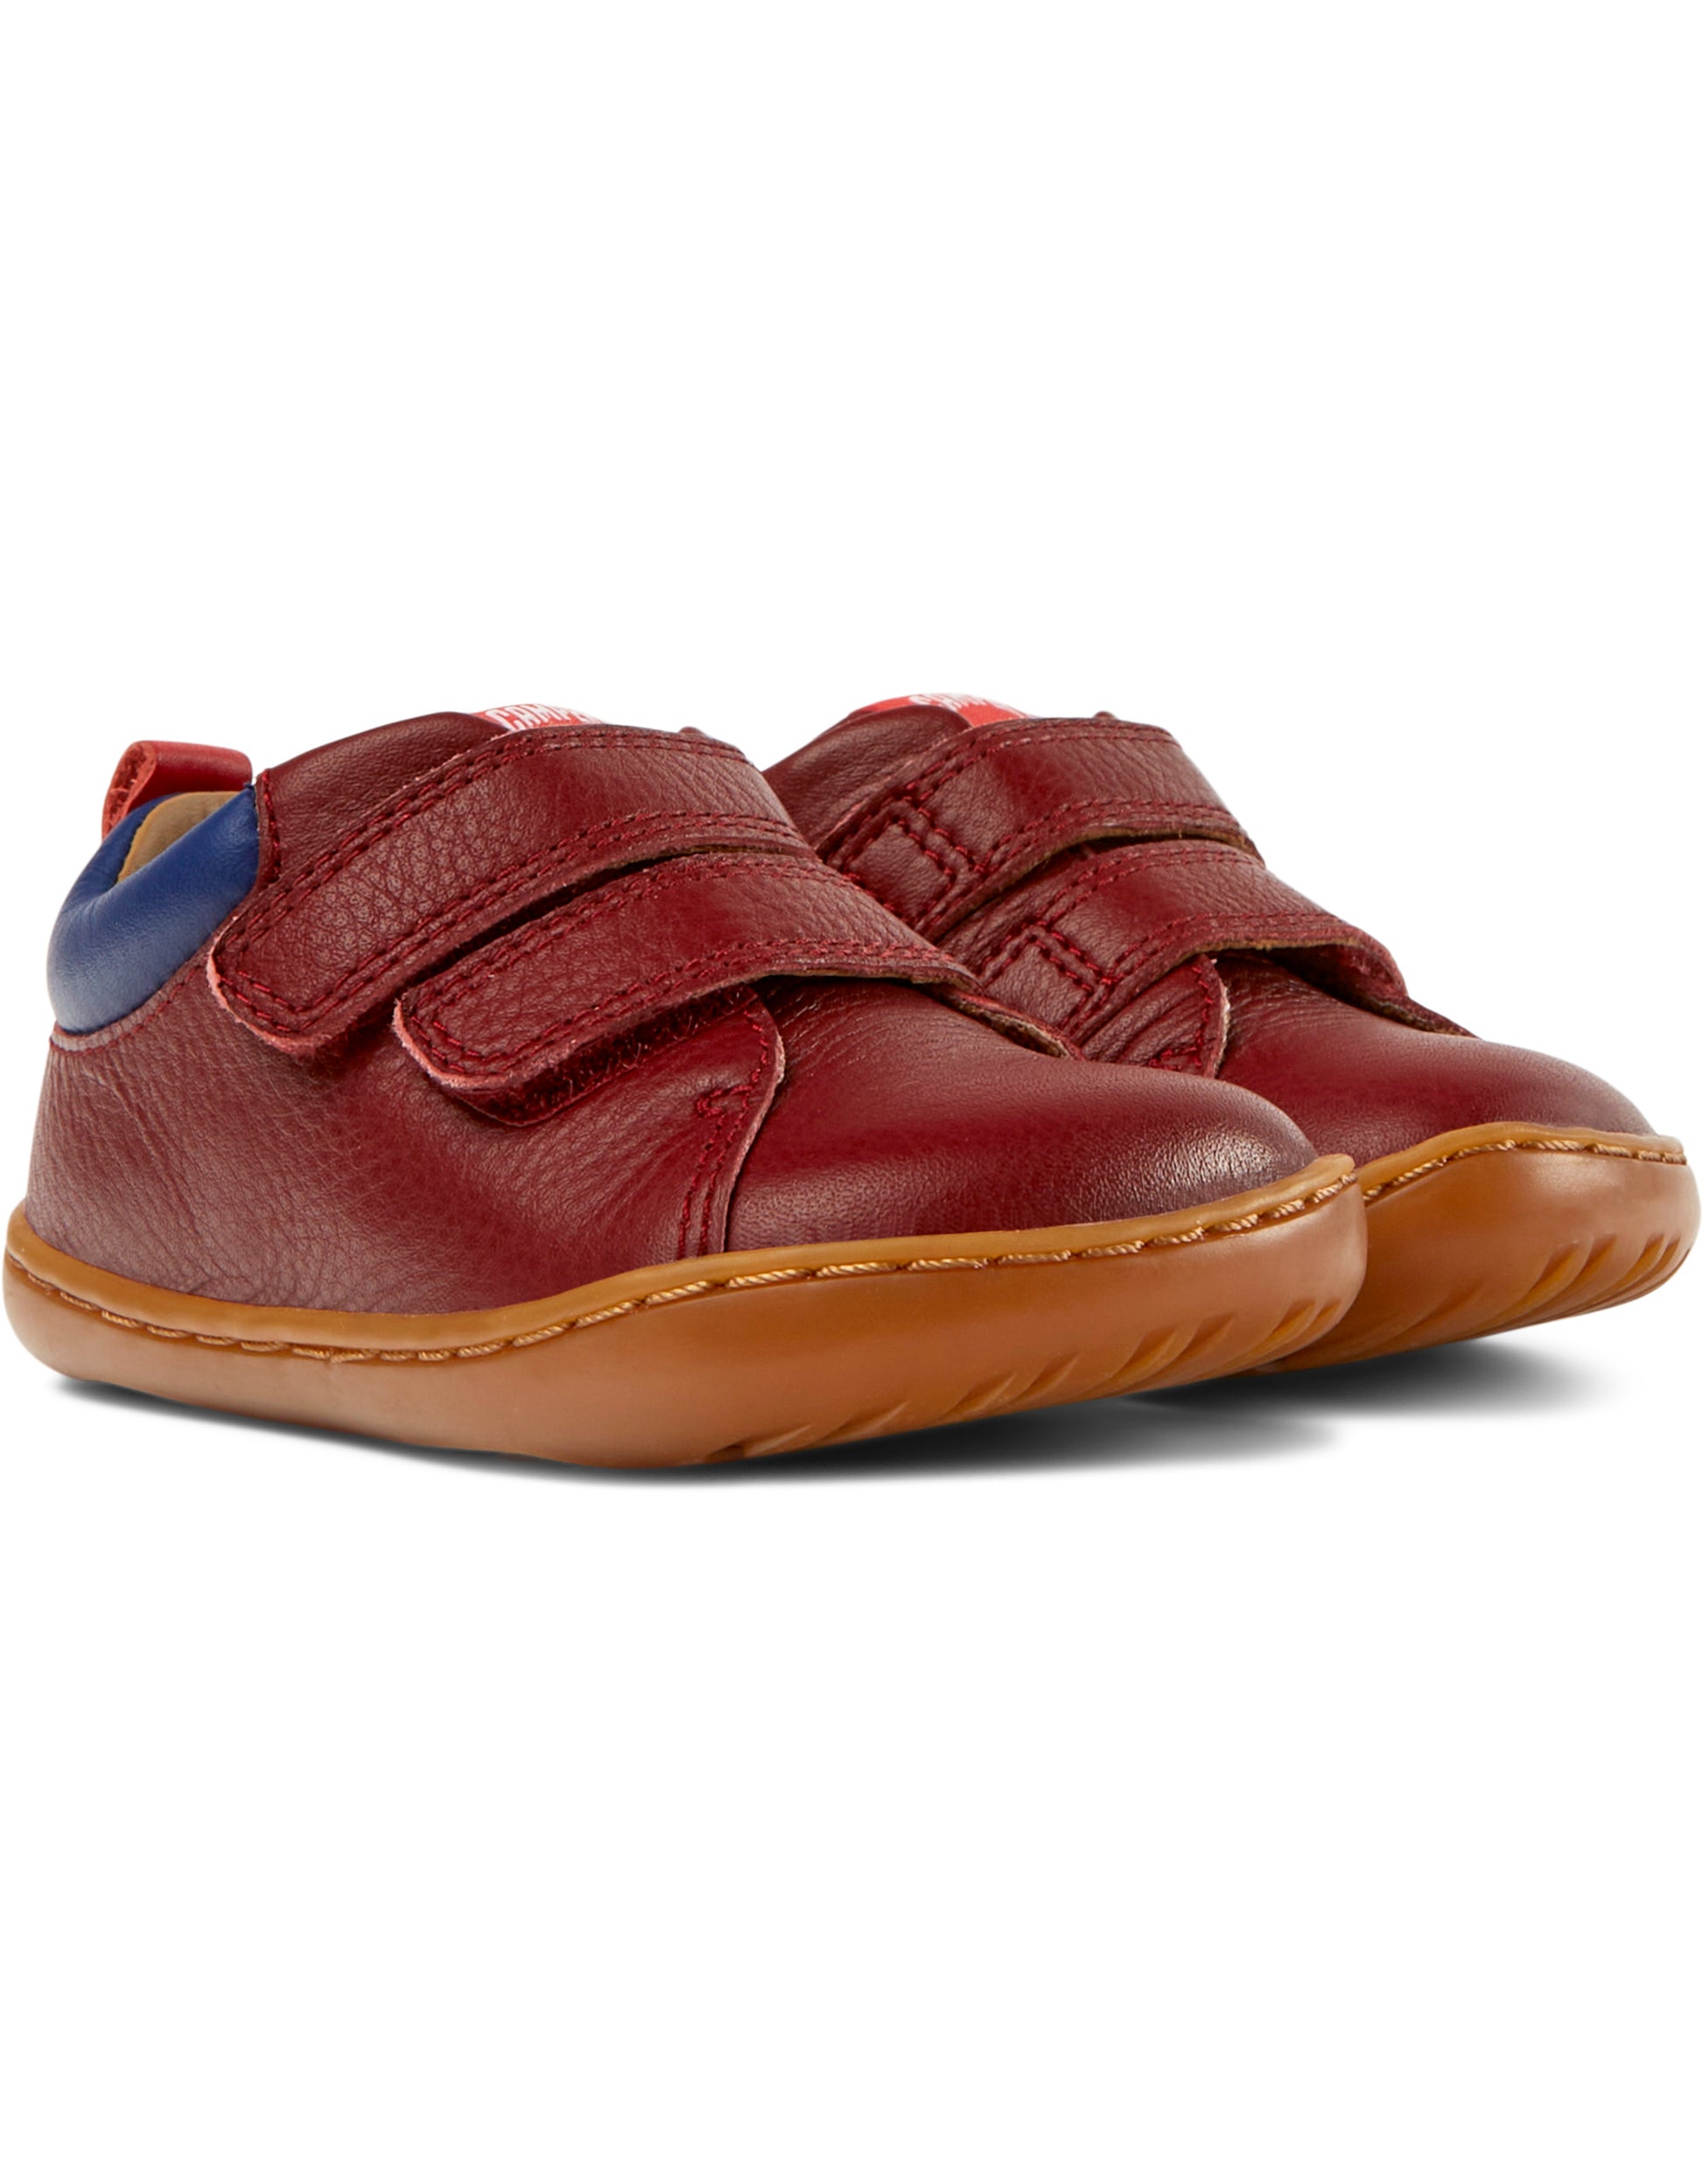 A boys casual shoe by Camper, style K800405-019, Peu Cami FW, in Burgundy Leather, with velcro fastening. Front pair view.